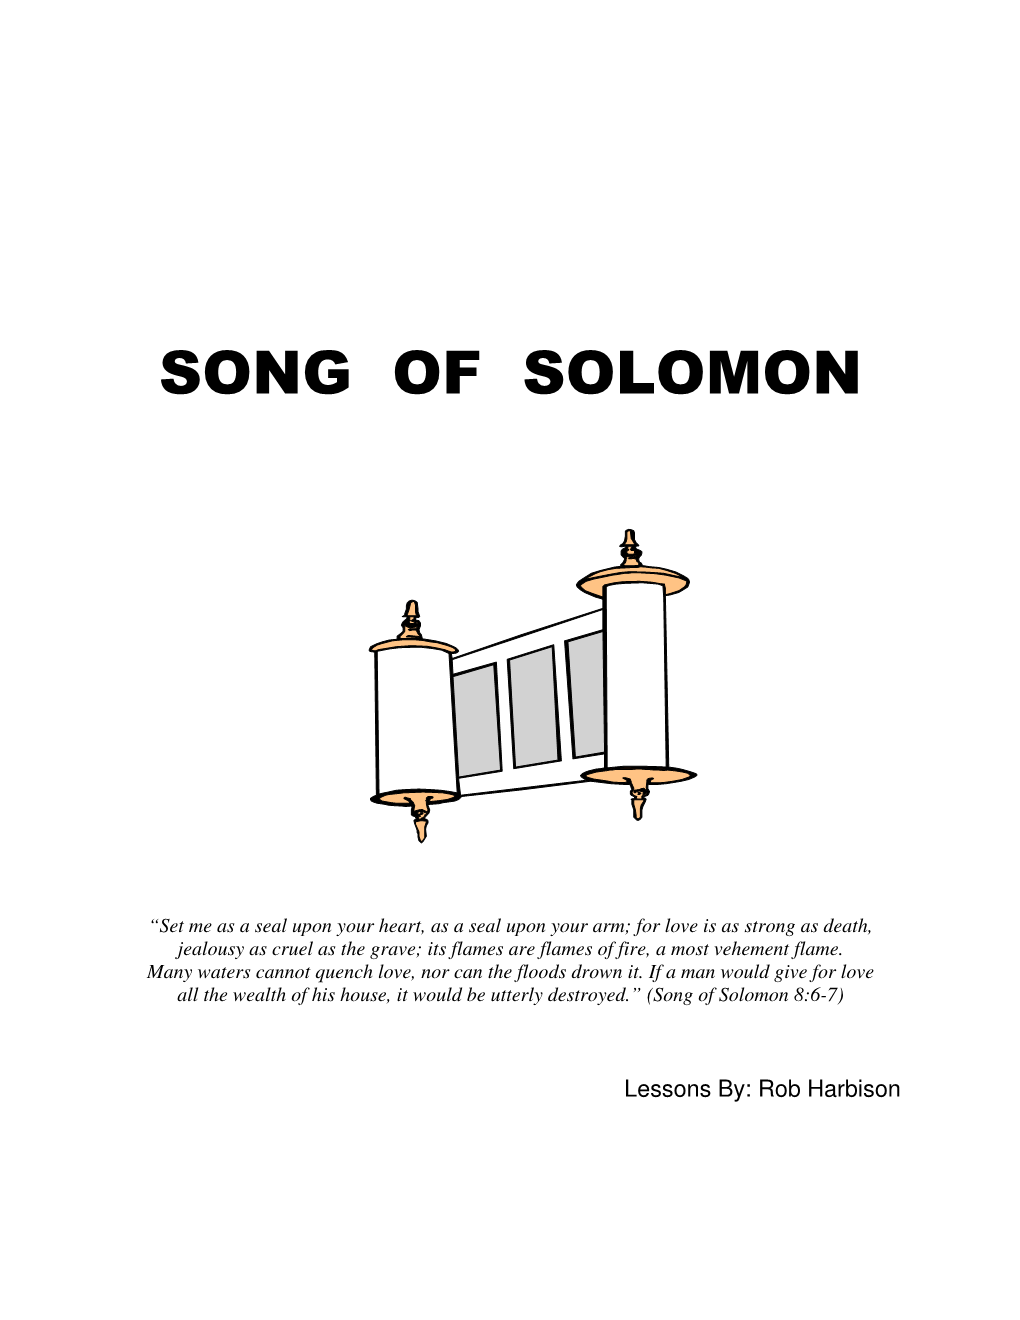 Bible Class Book on the Song of Solomon